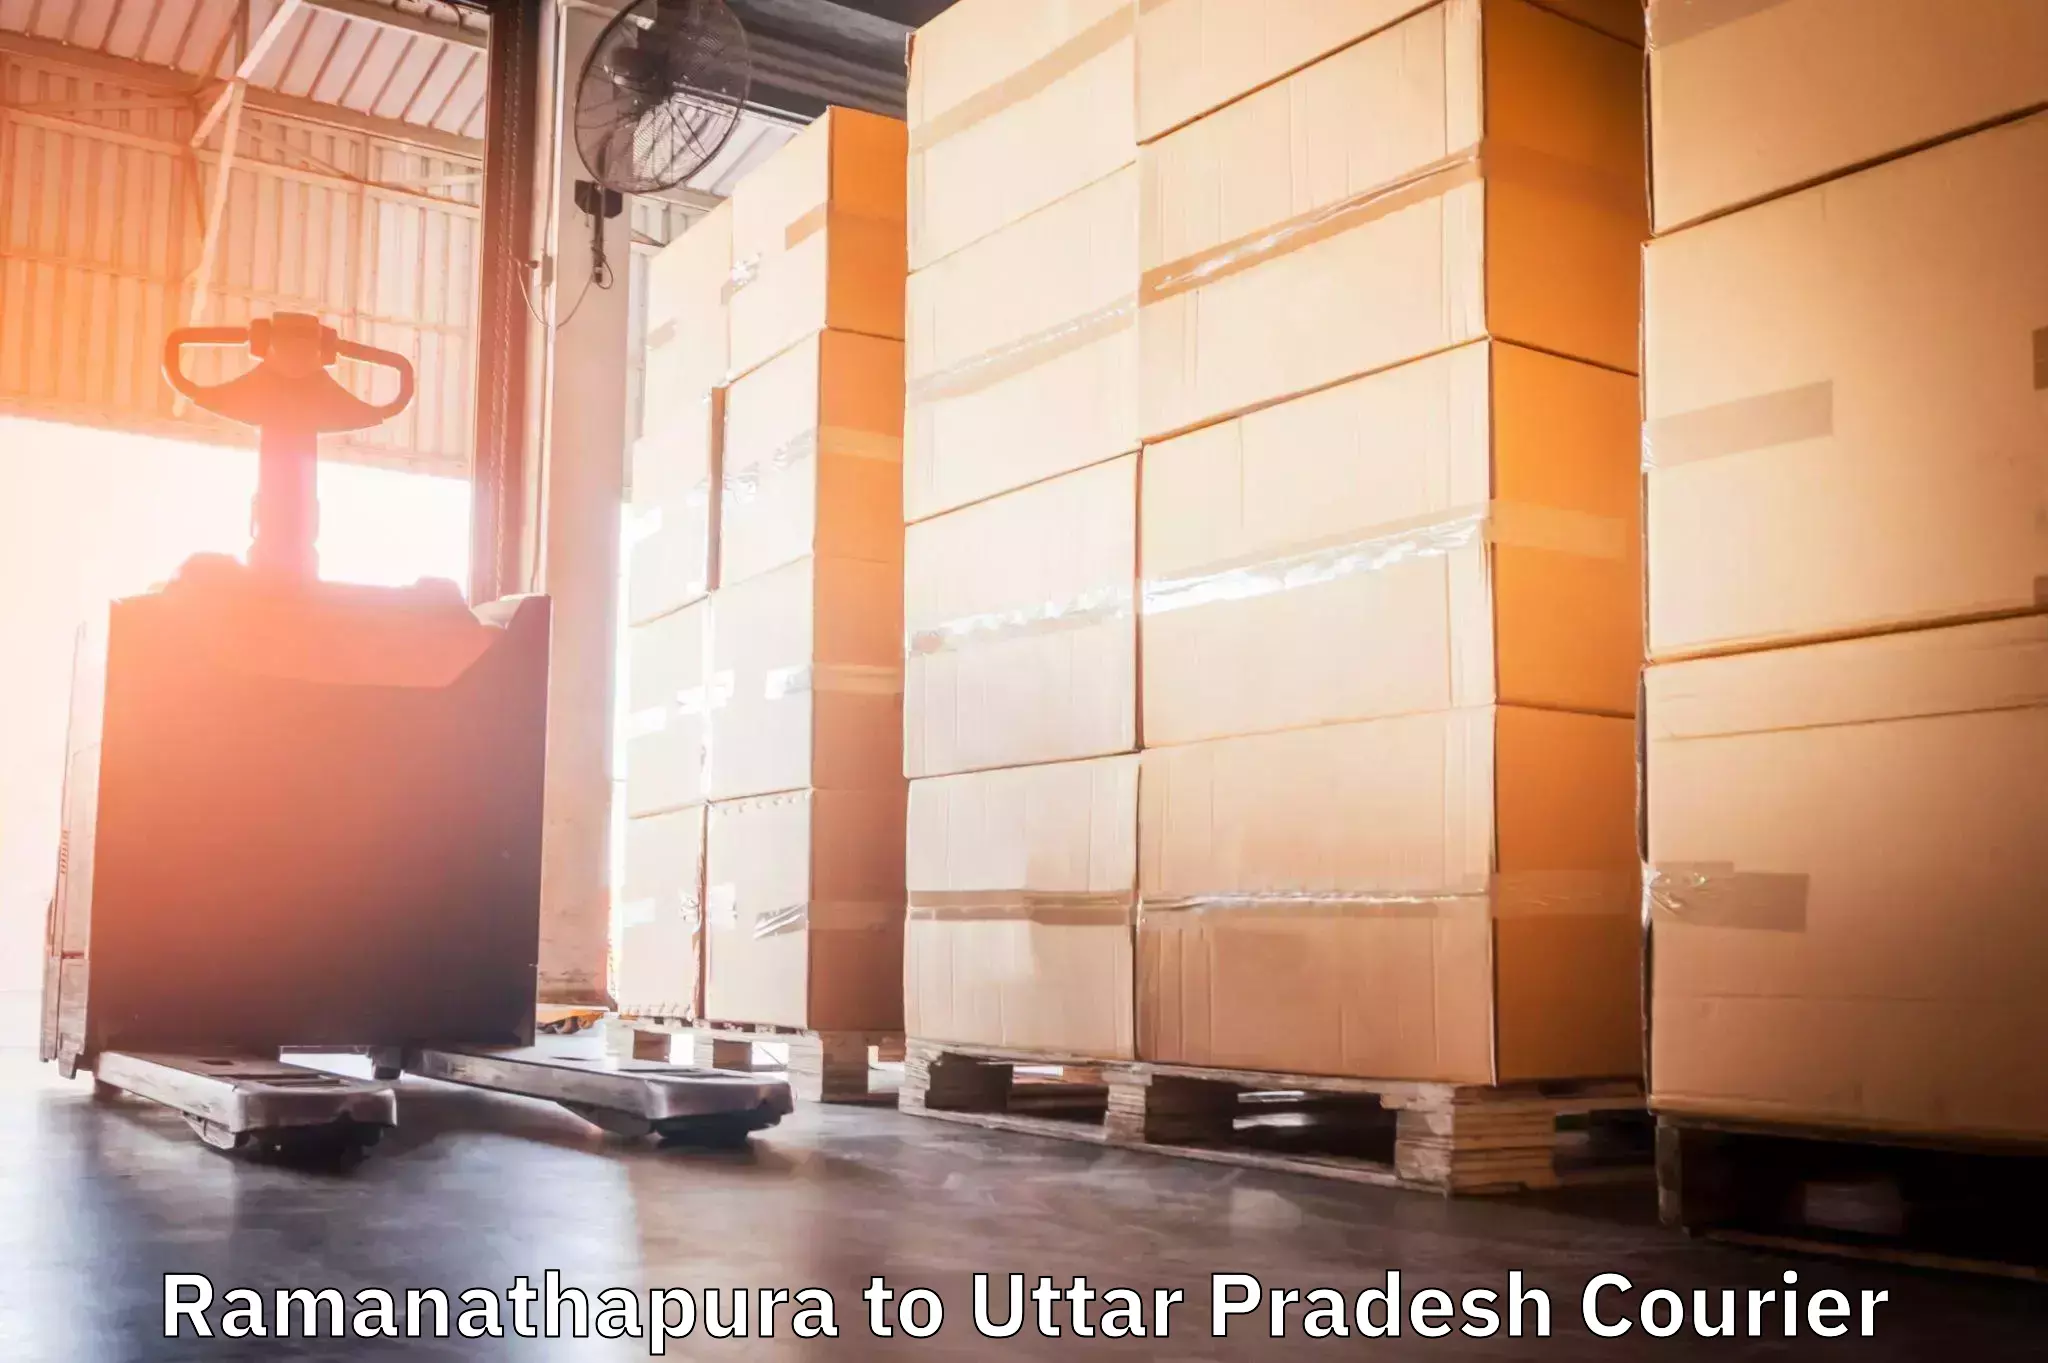 Professional courier handling Ramanathapura to Ghazipur